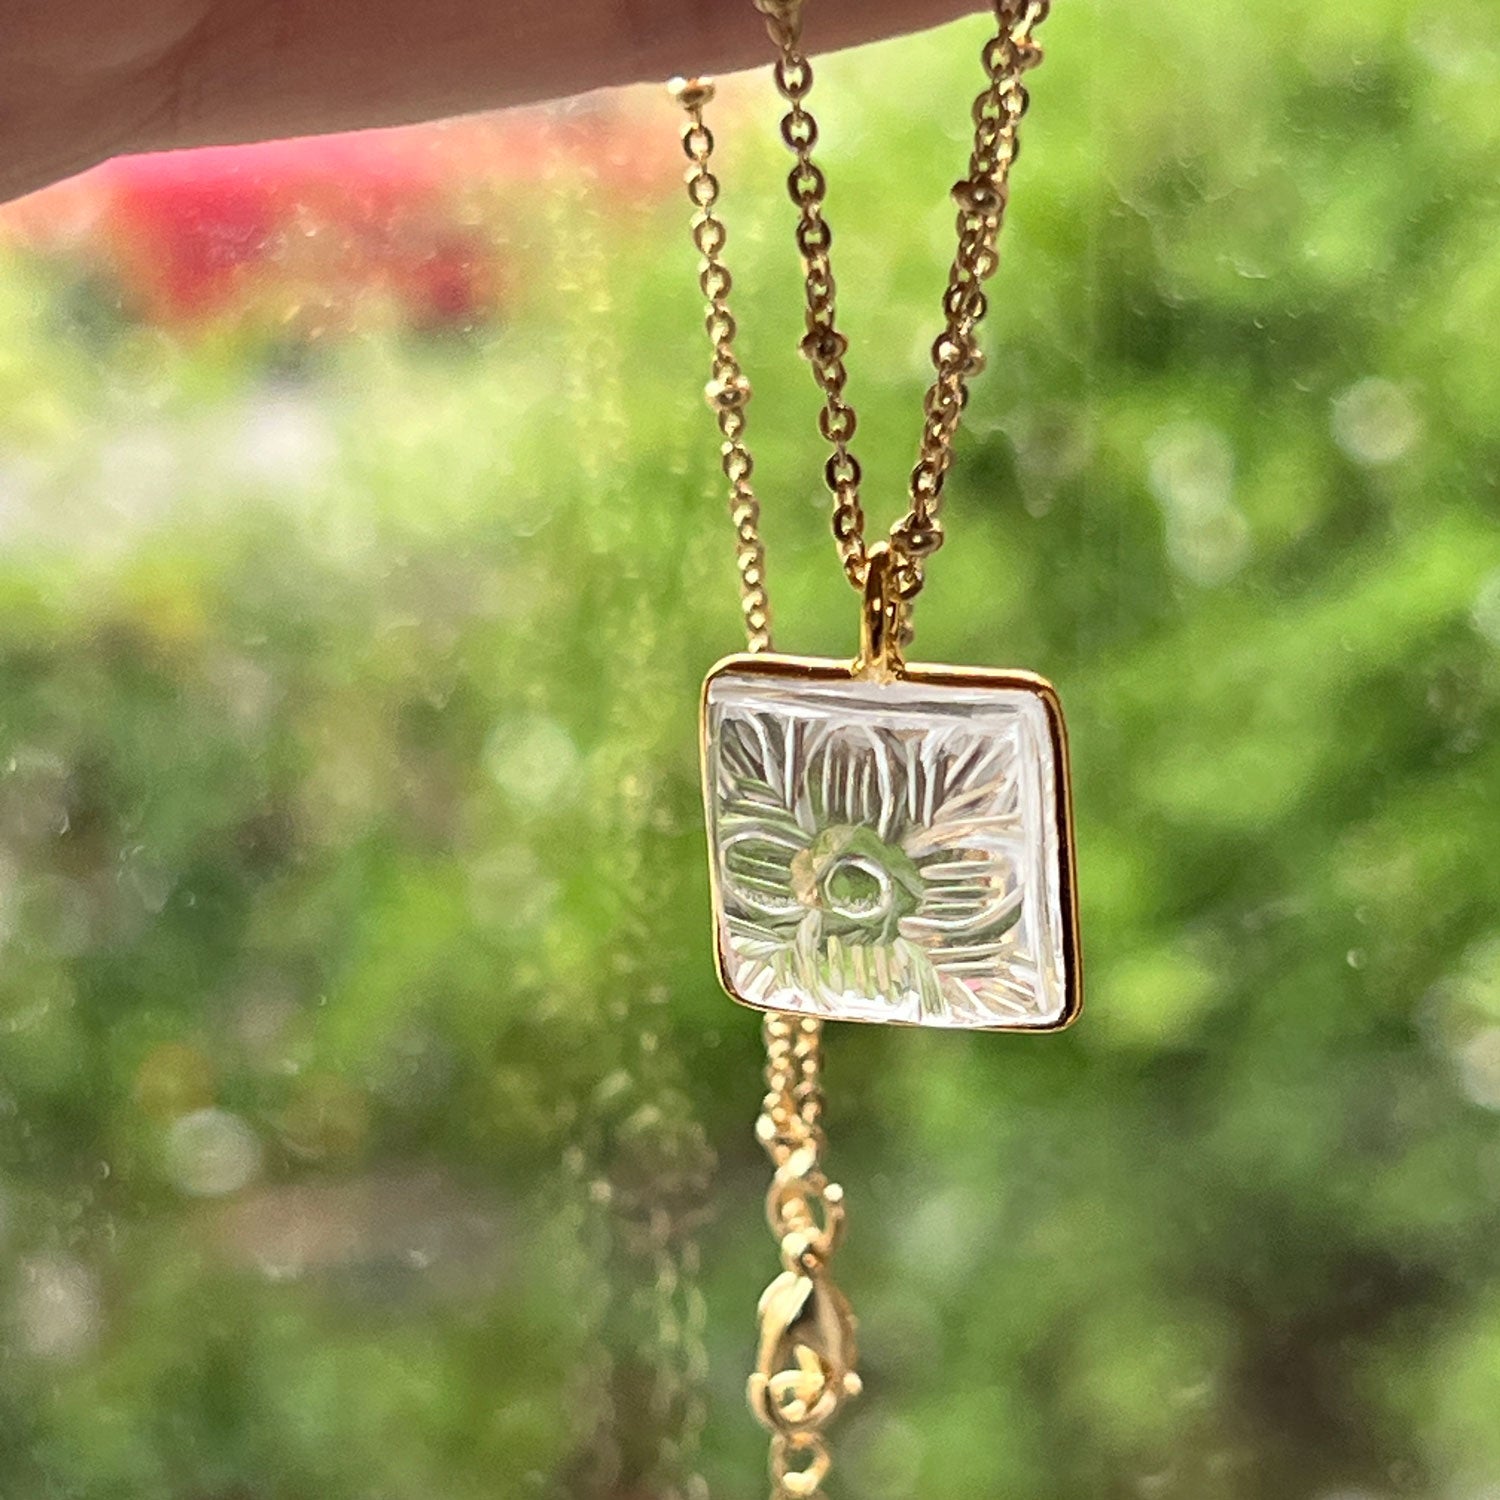 Carved Square Rock Crystal Pendant on Short Satellite Chain